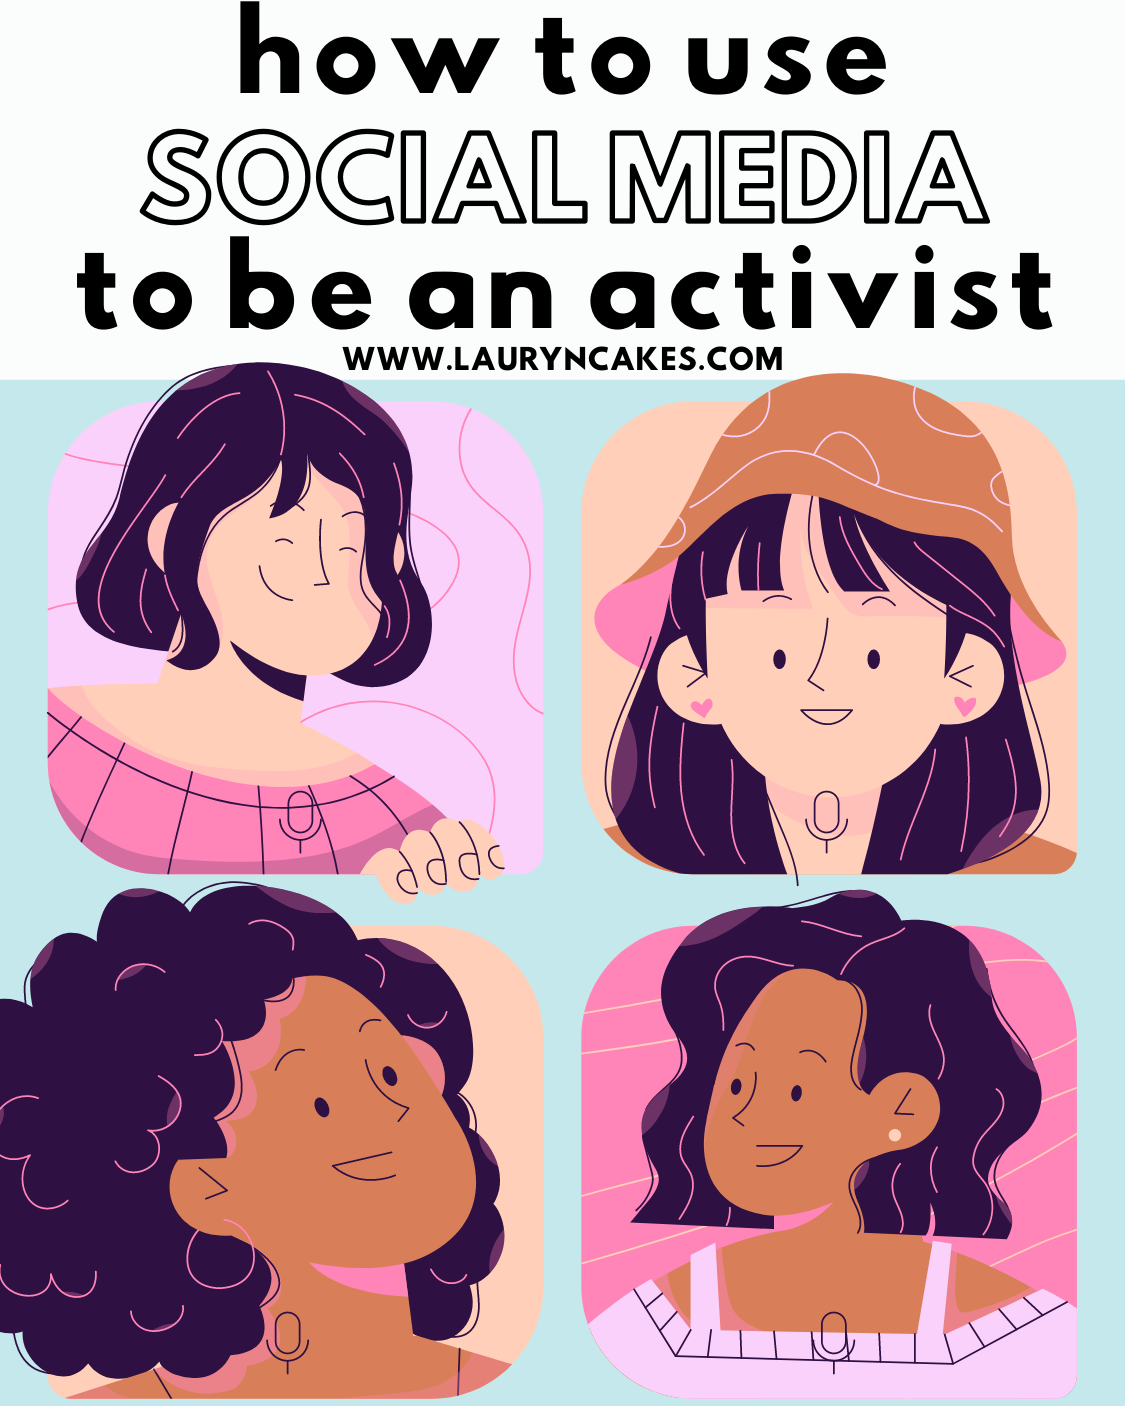 hot to use social media to be an activist